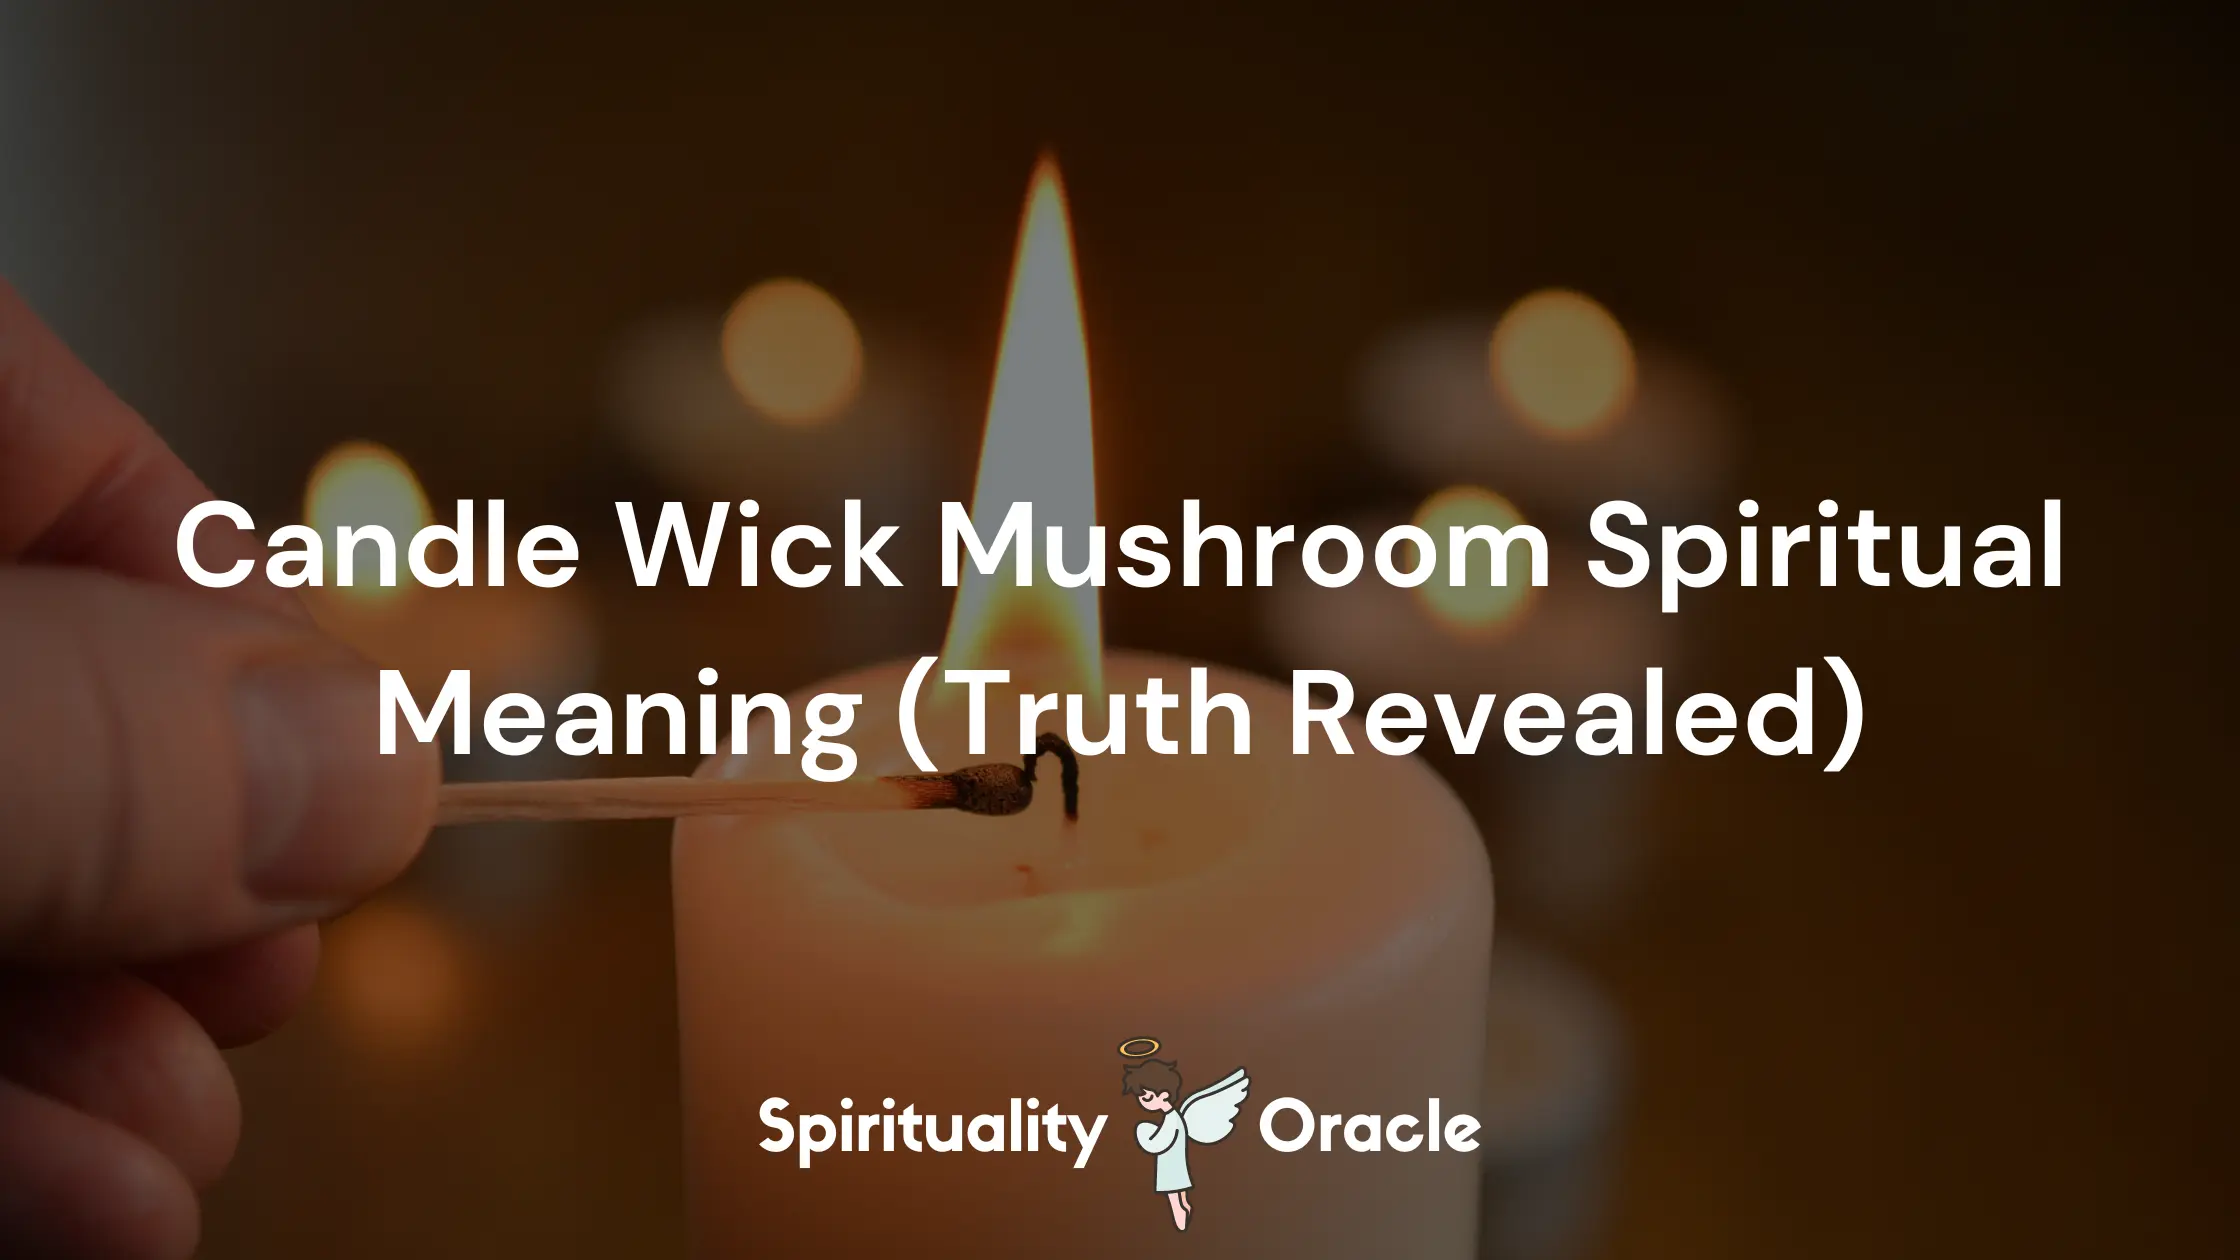 Candle Wick Mushroom Spiritual Meaning (Truth Revealed)